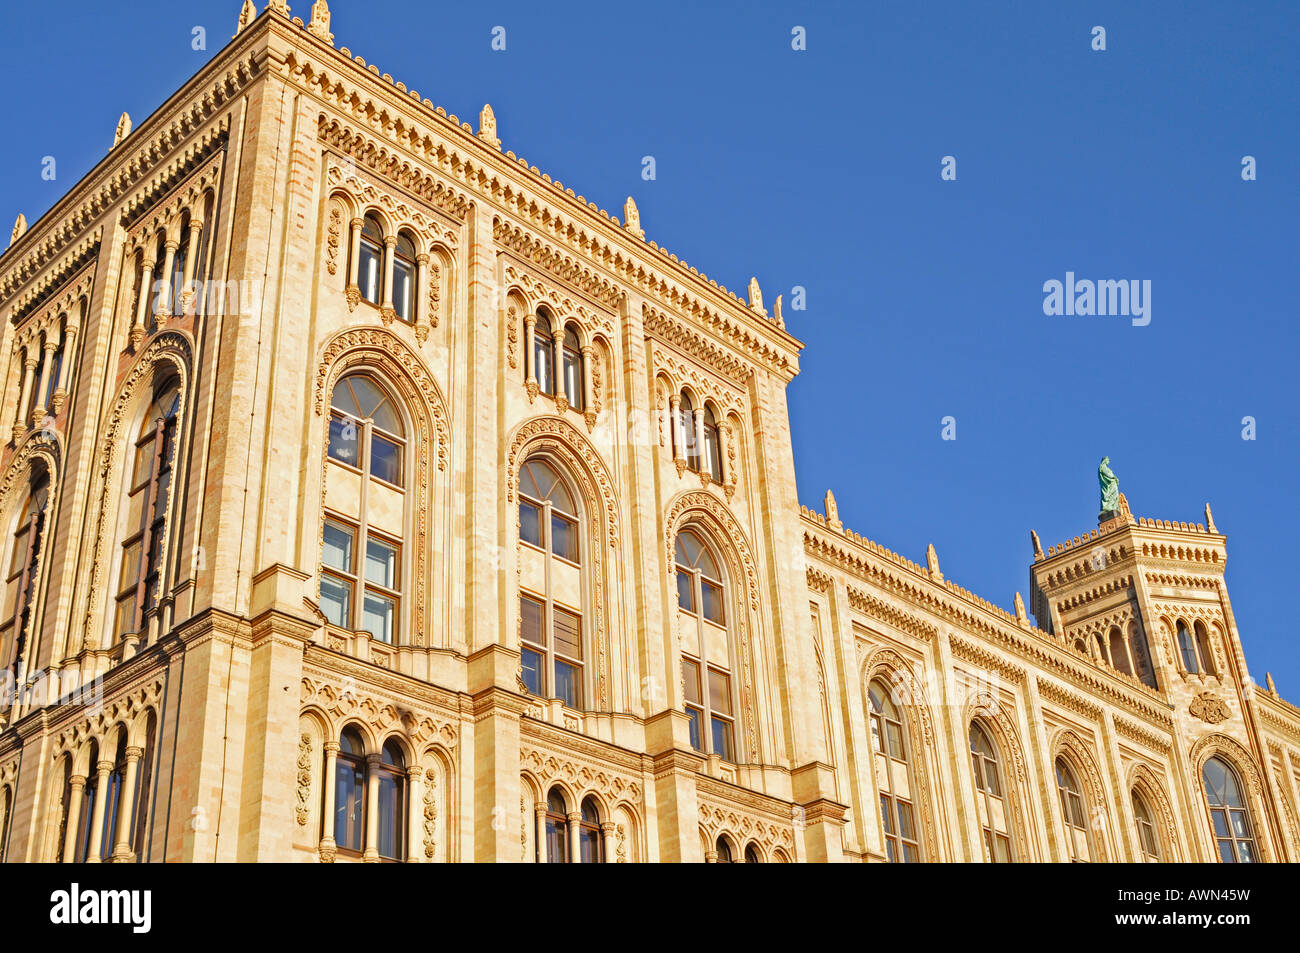 Upper Bavarian government buildings, Munich, Germany, Europe Stock Photo